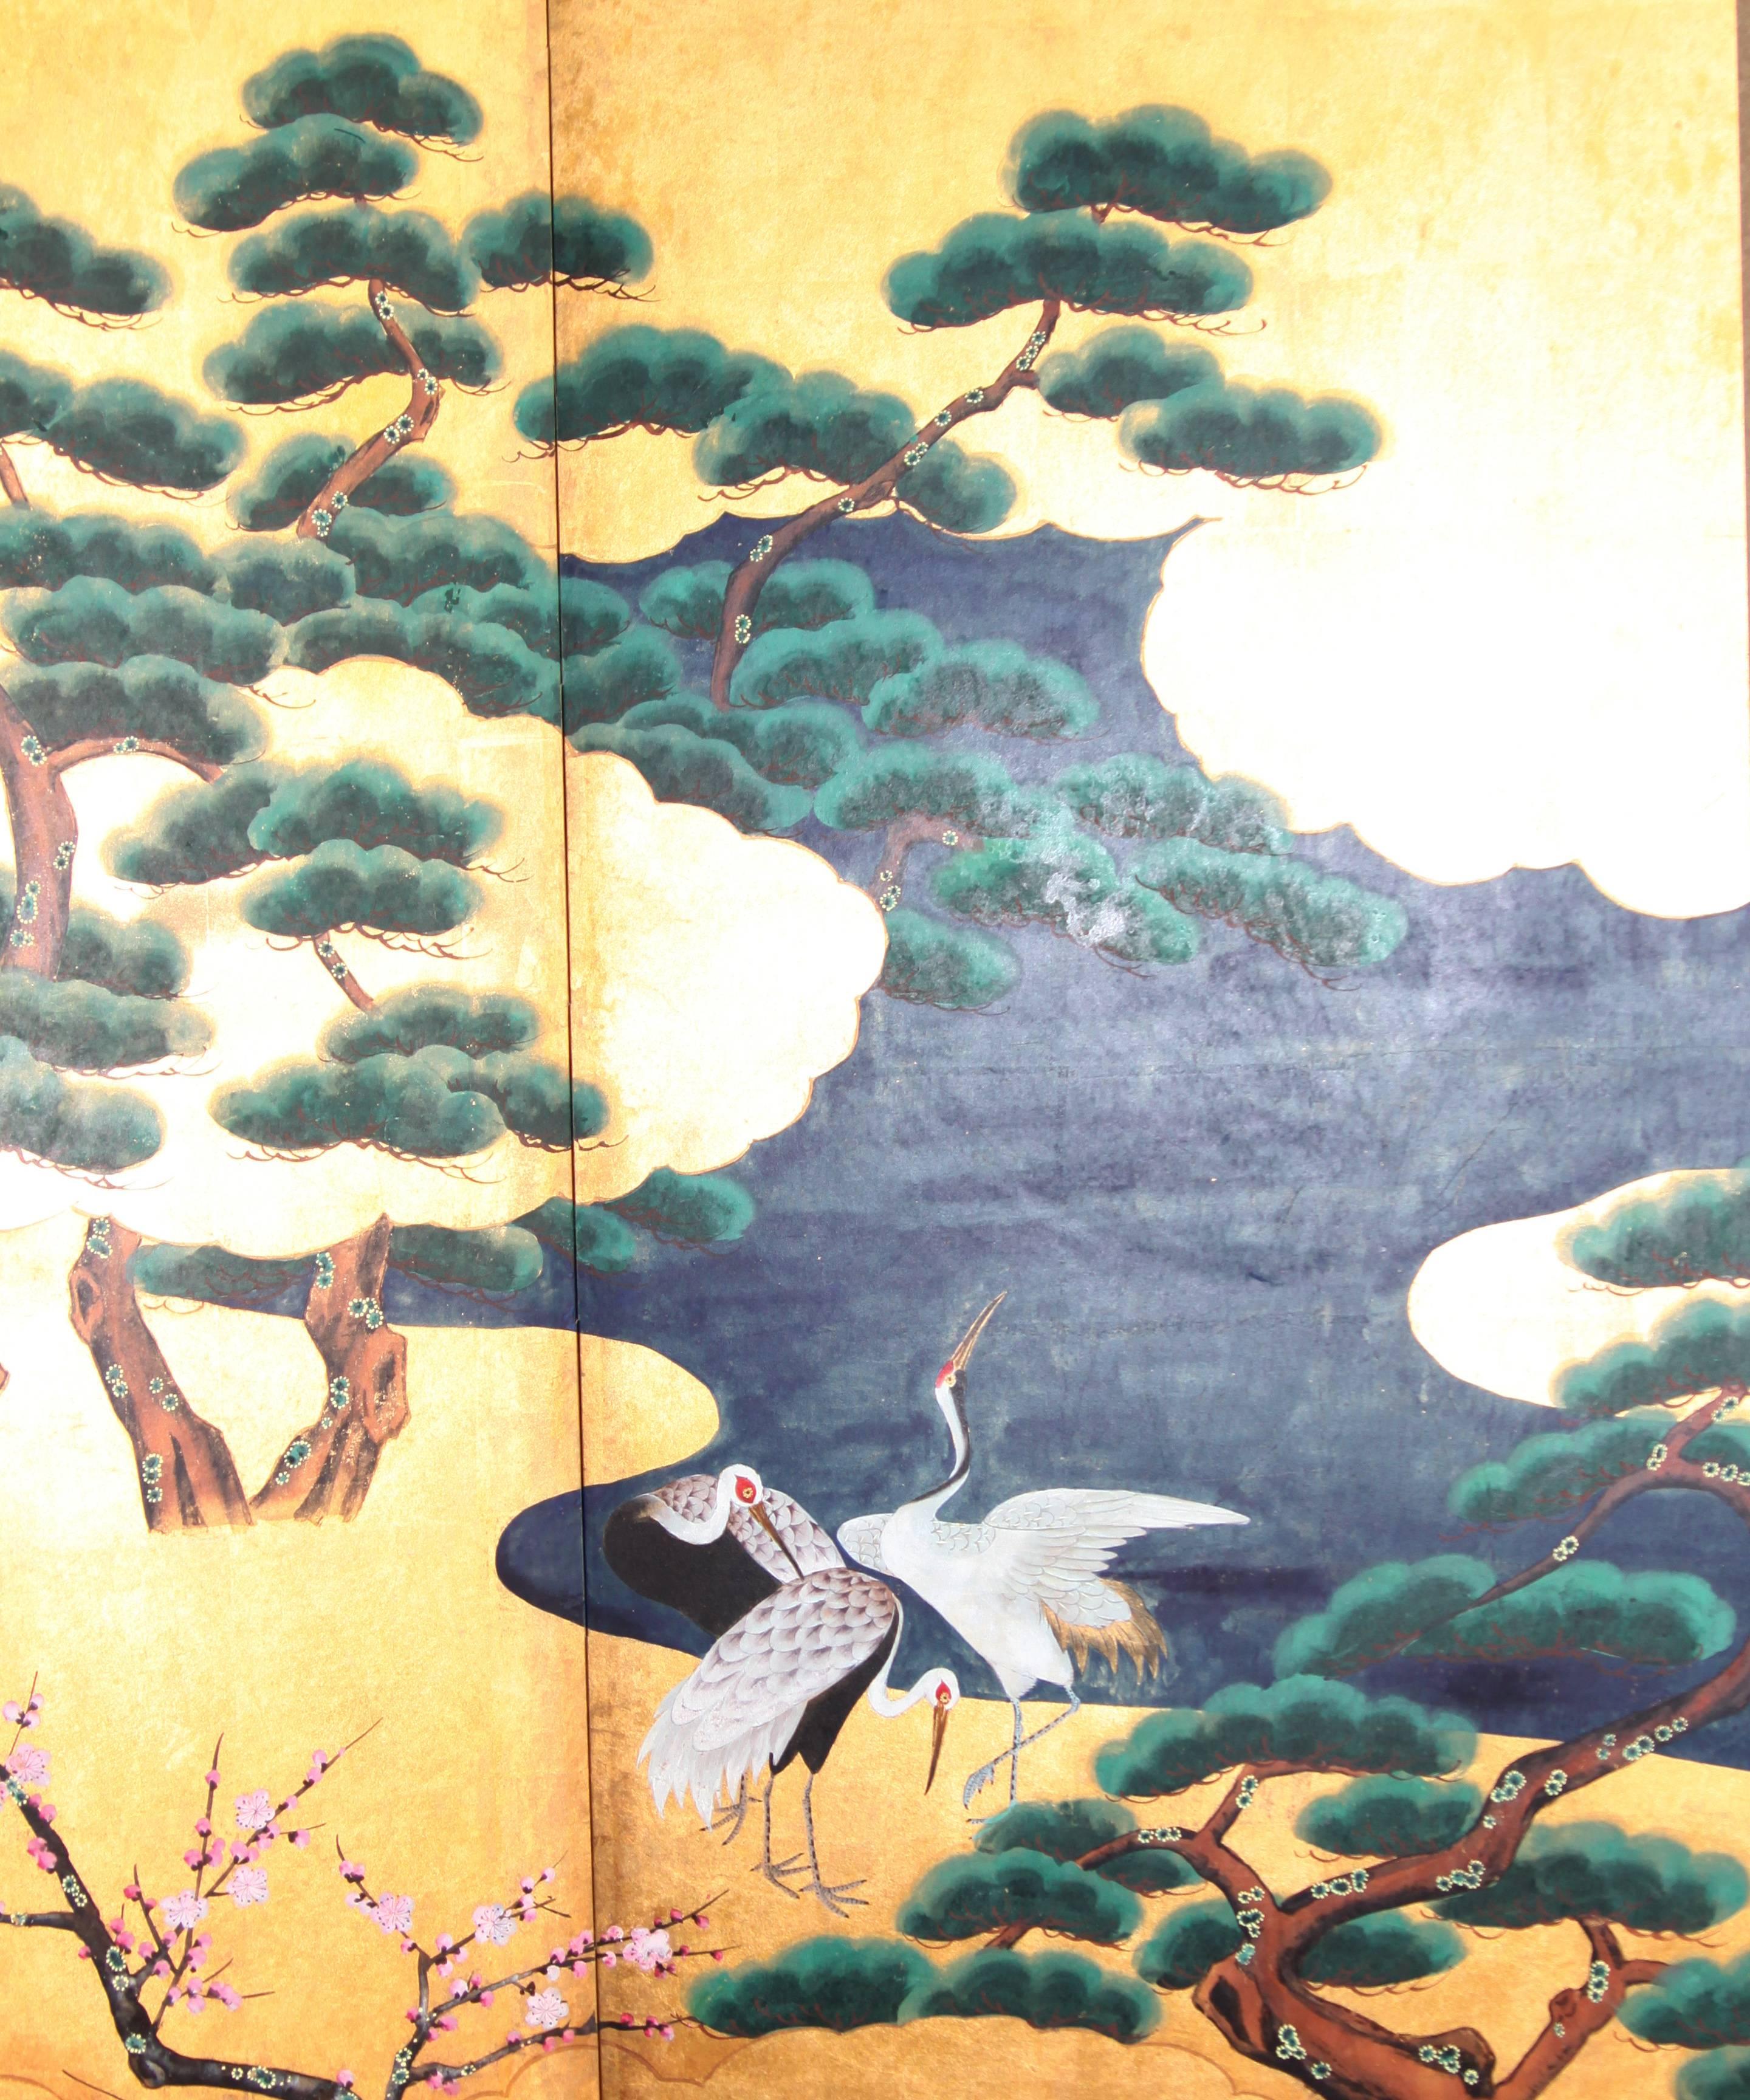 The Cranes by The River painting of this four-panel screen is hand-painted in watercolor, on squares of gold leaf which are applied by hand to the paper base over carefully jointed wooden lattice frames. Lacquer rails are then applied to the